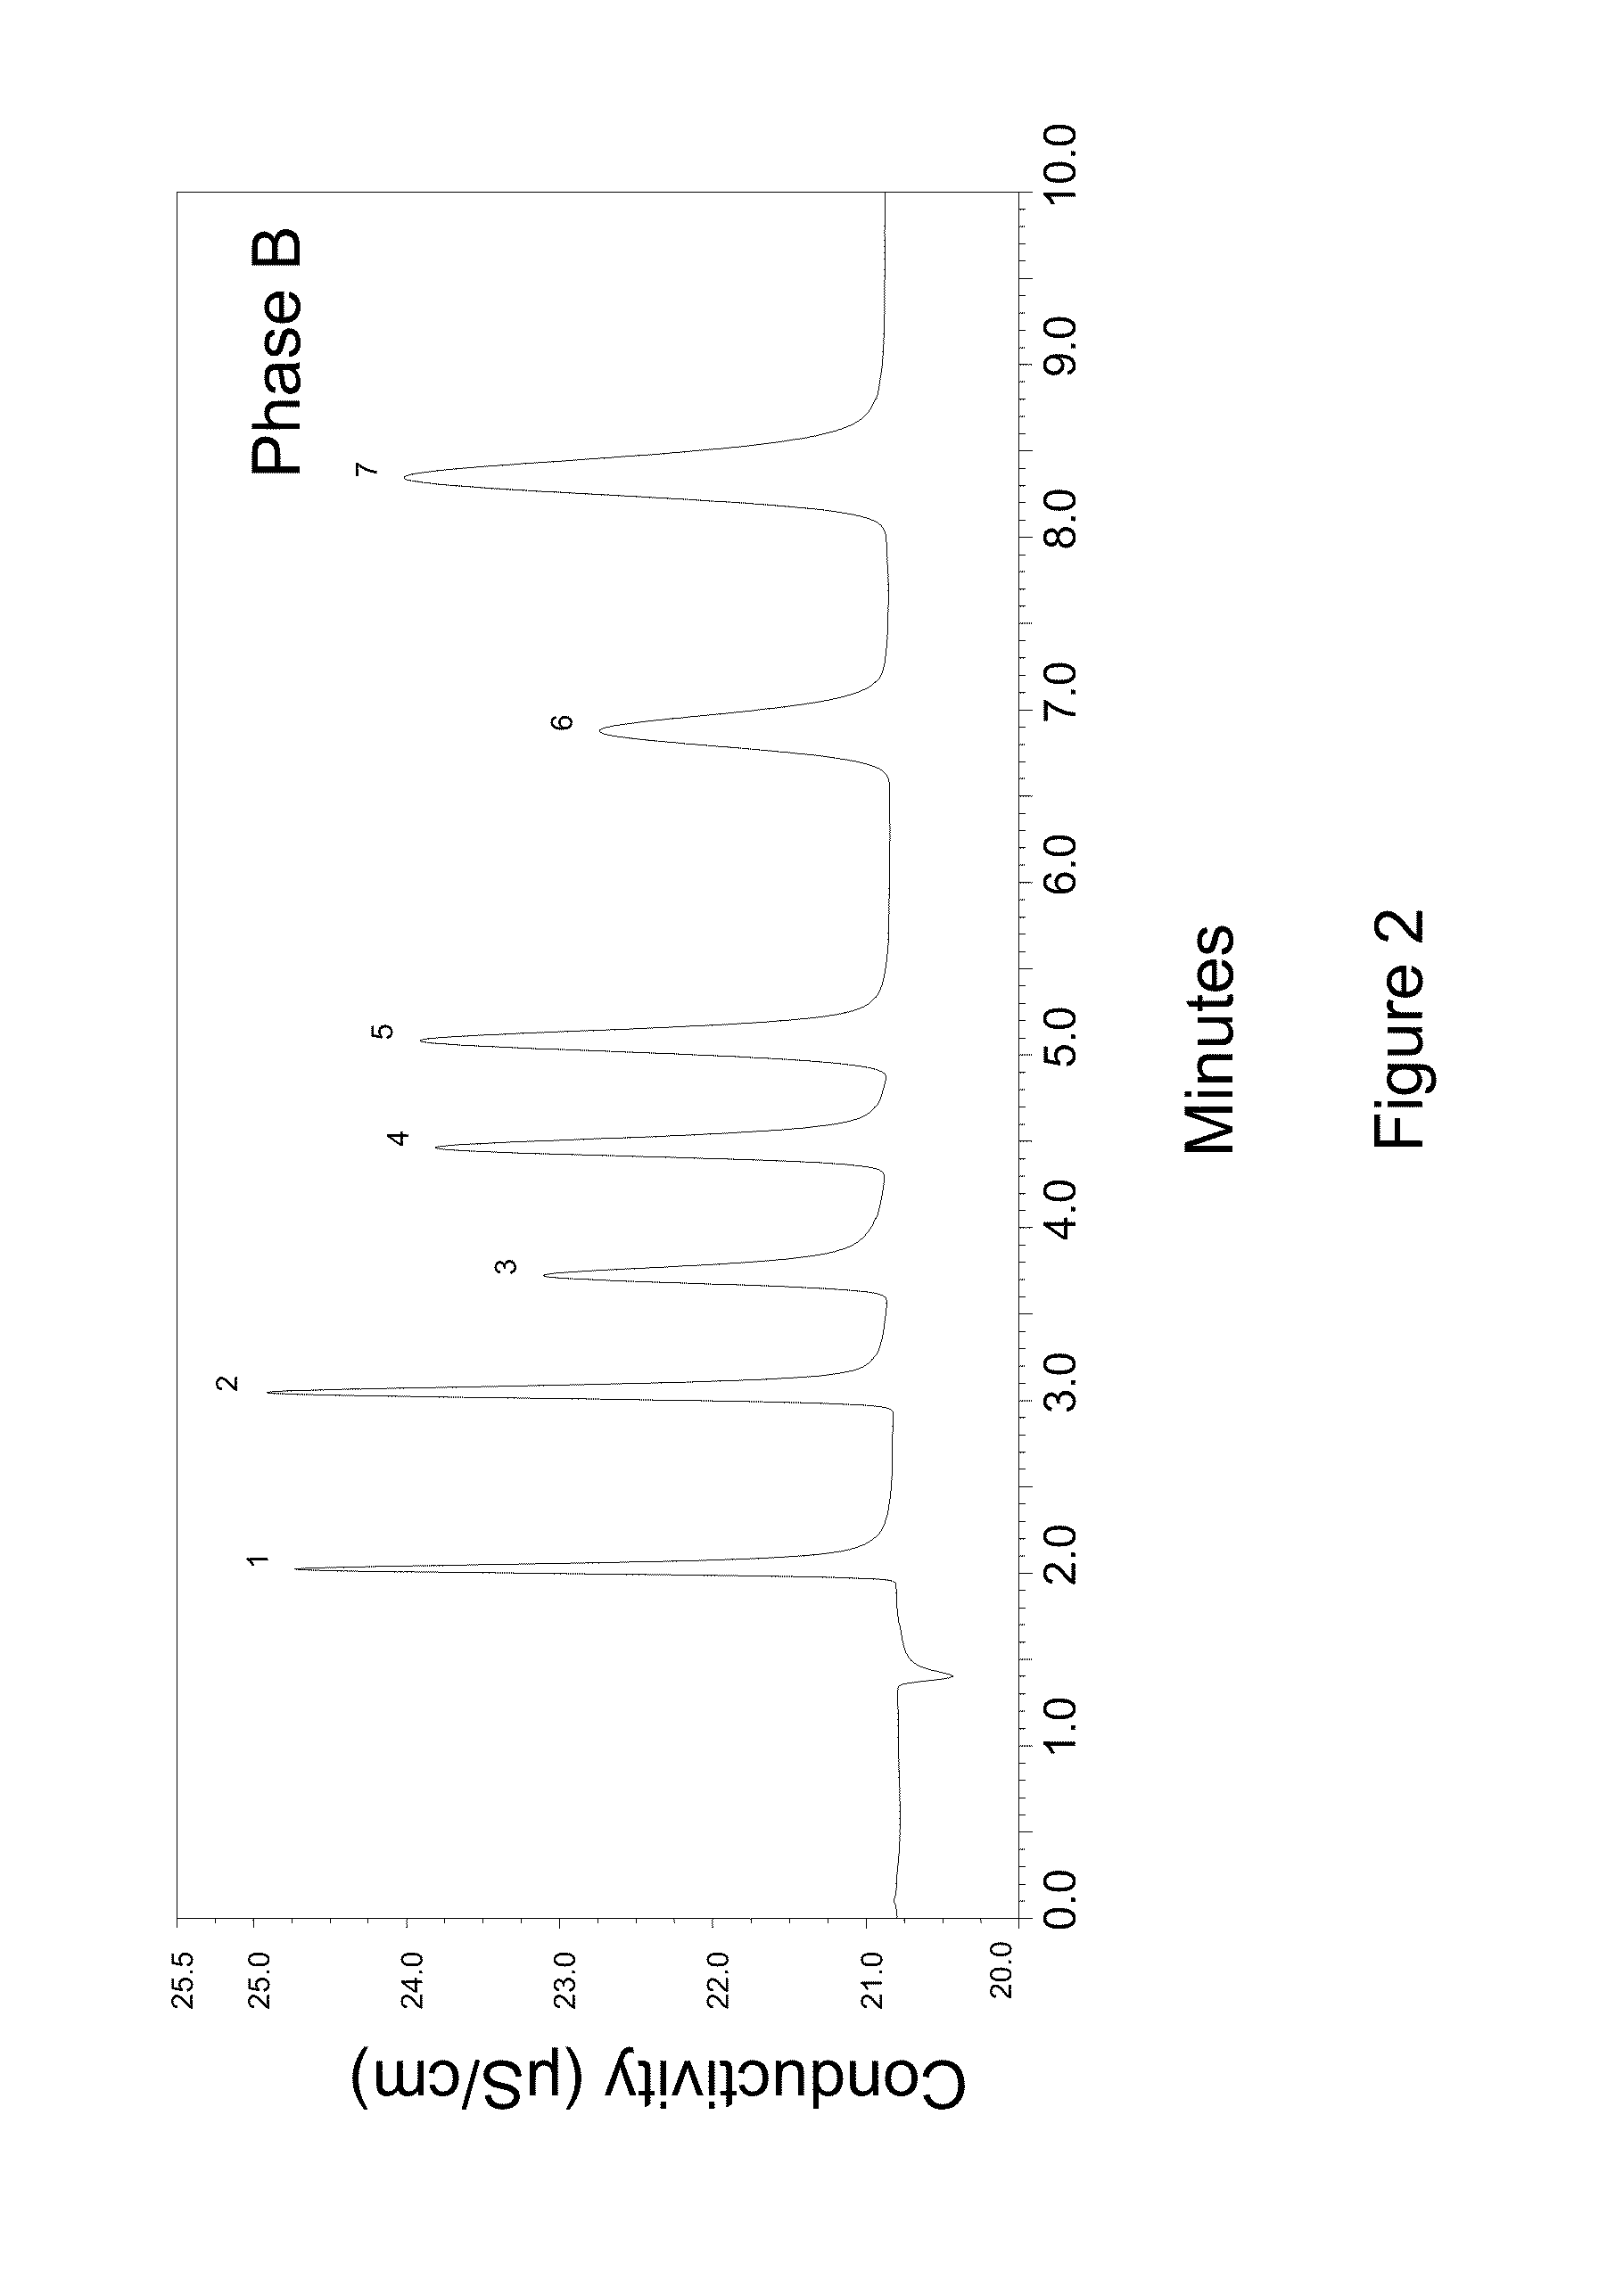 High capacity ion chromatography stationary phases and method of forming